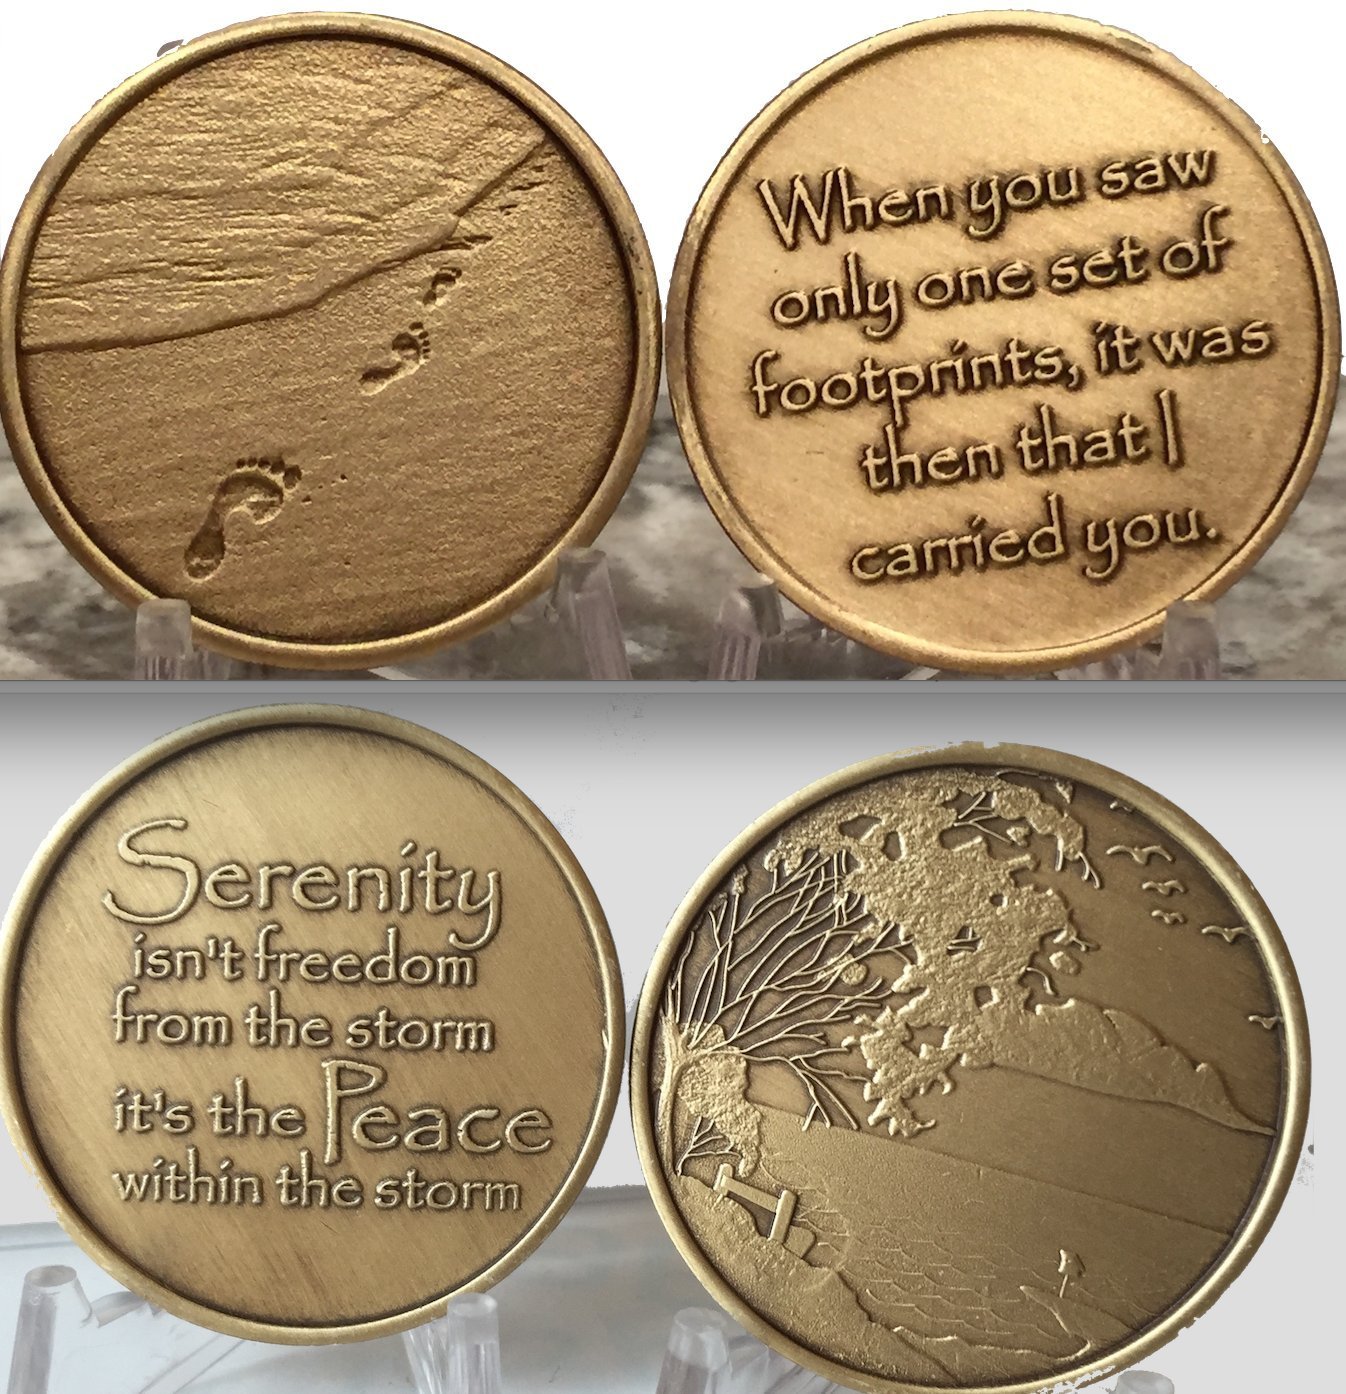 Footprints In The Sand - Serenity Peace Within The Storm Bronze Medallion Chi...